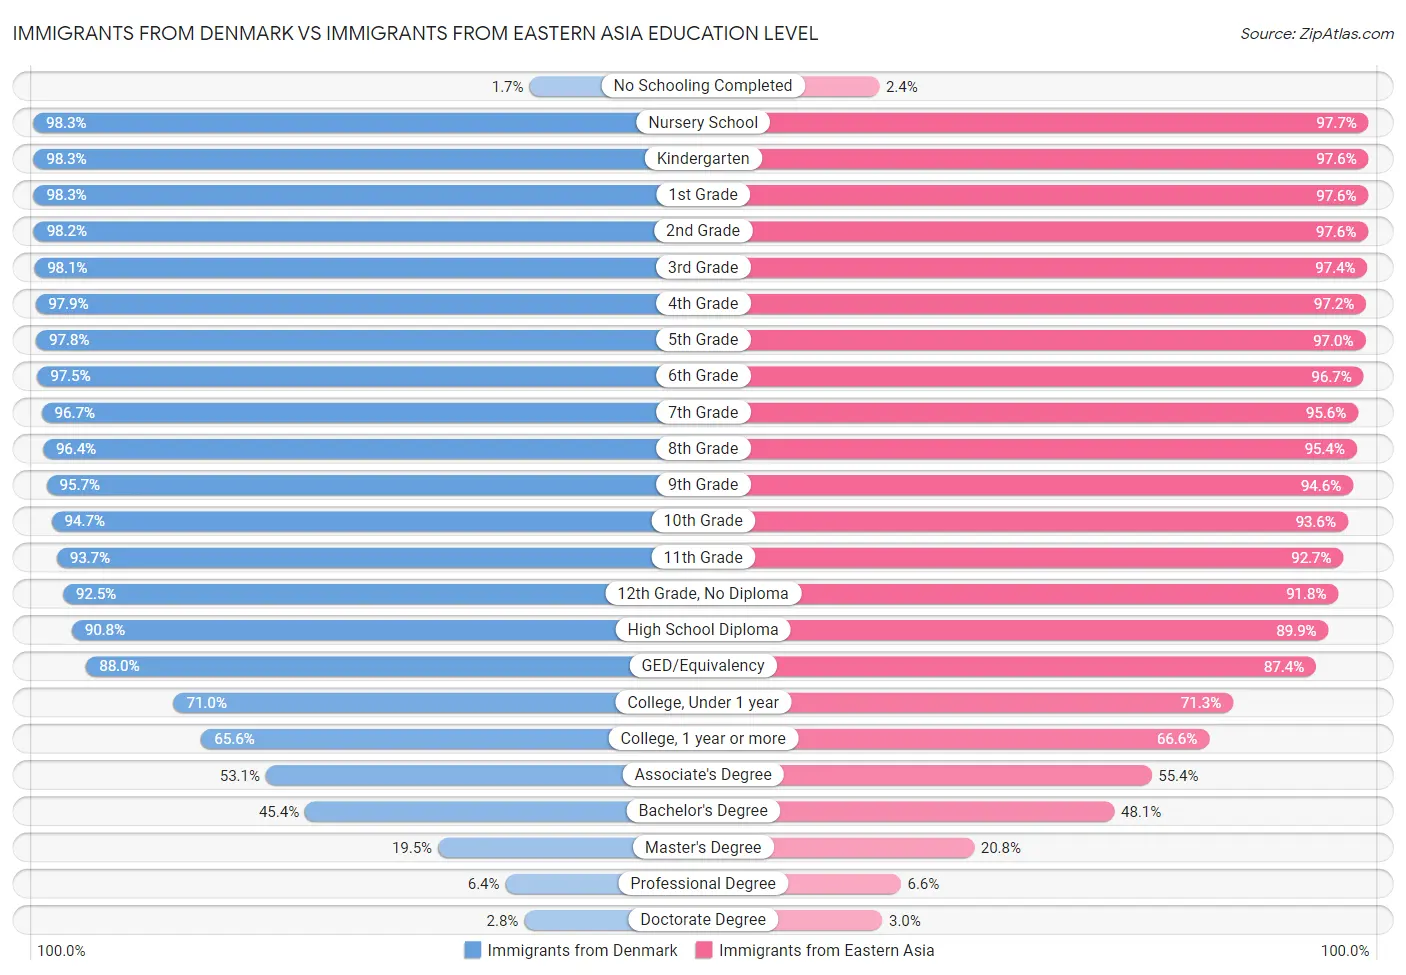 Immigrants from Denmark vs Immigrants from Eastern Asia Education Level